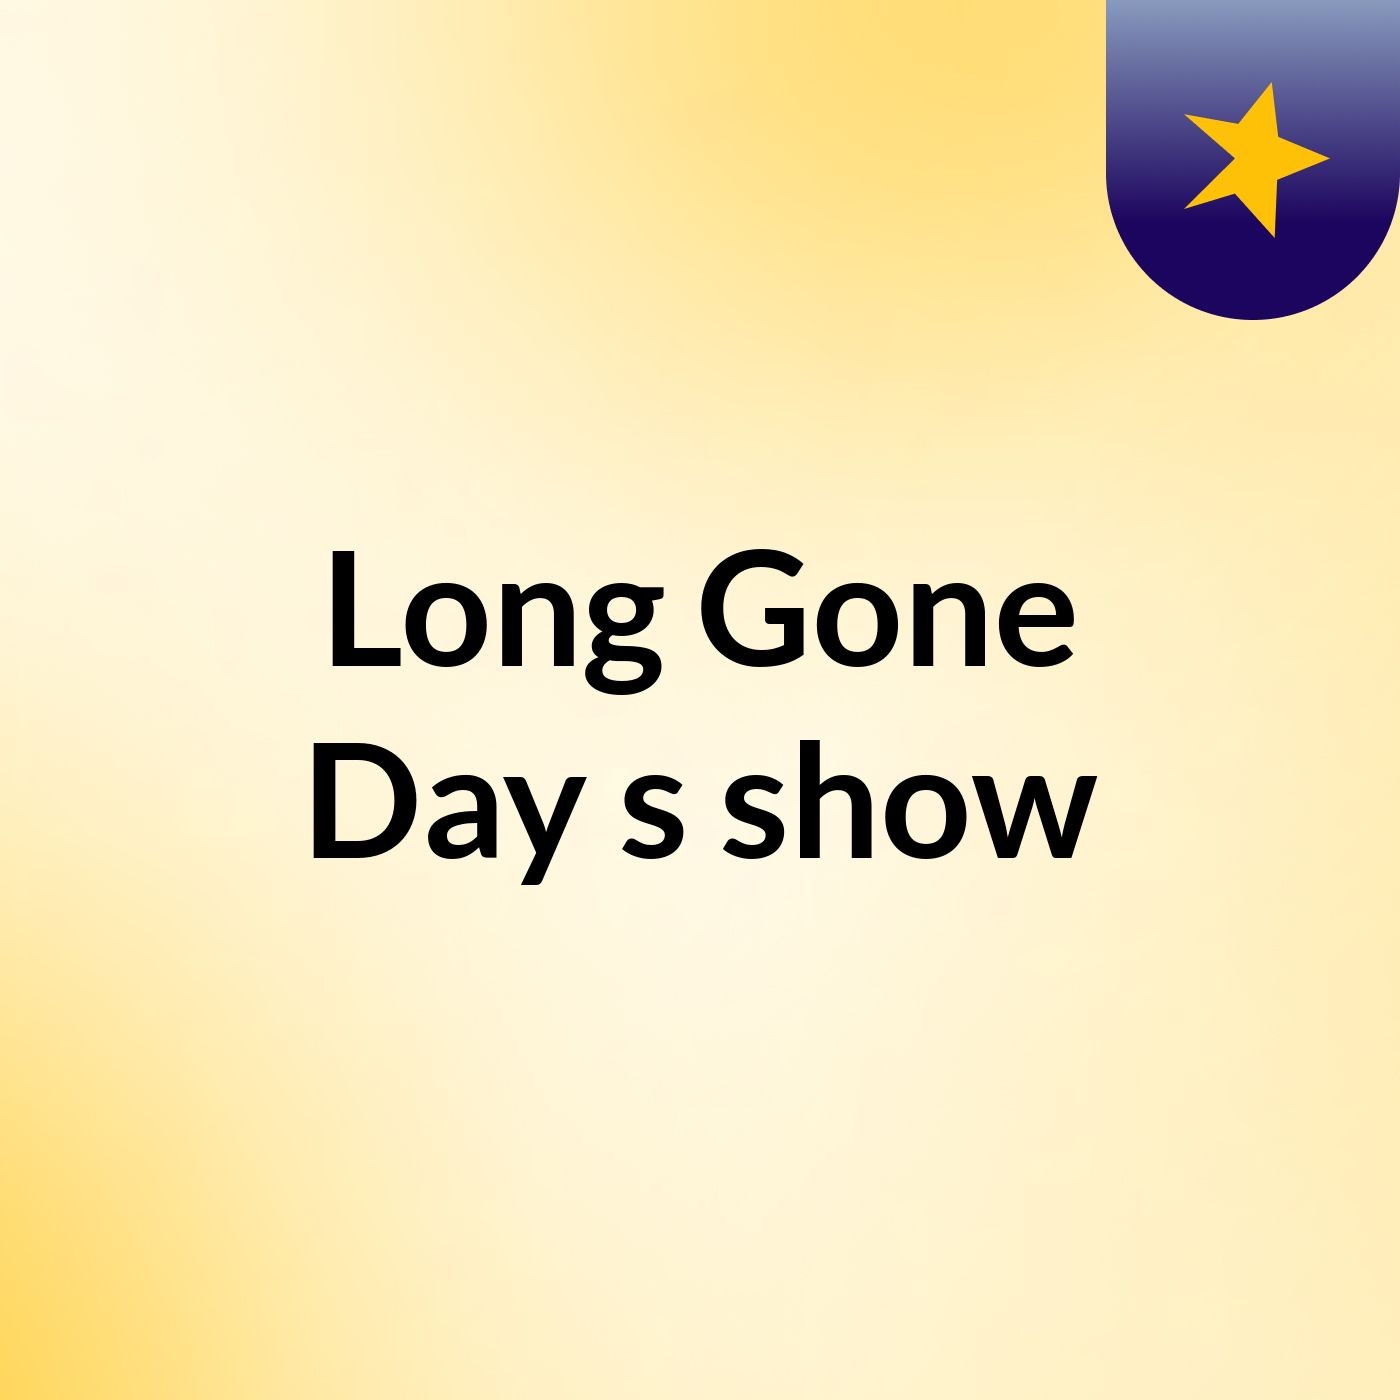 Long Gone Day's show